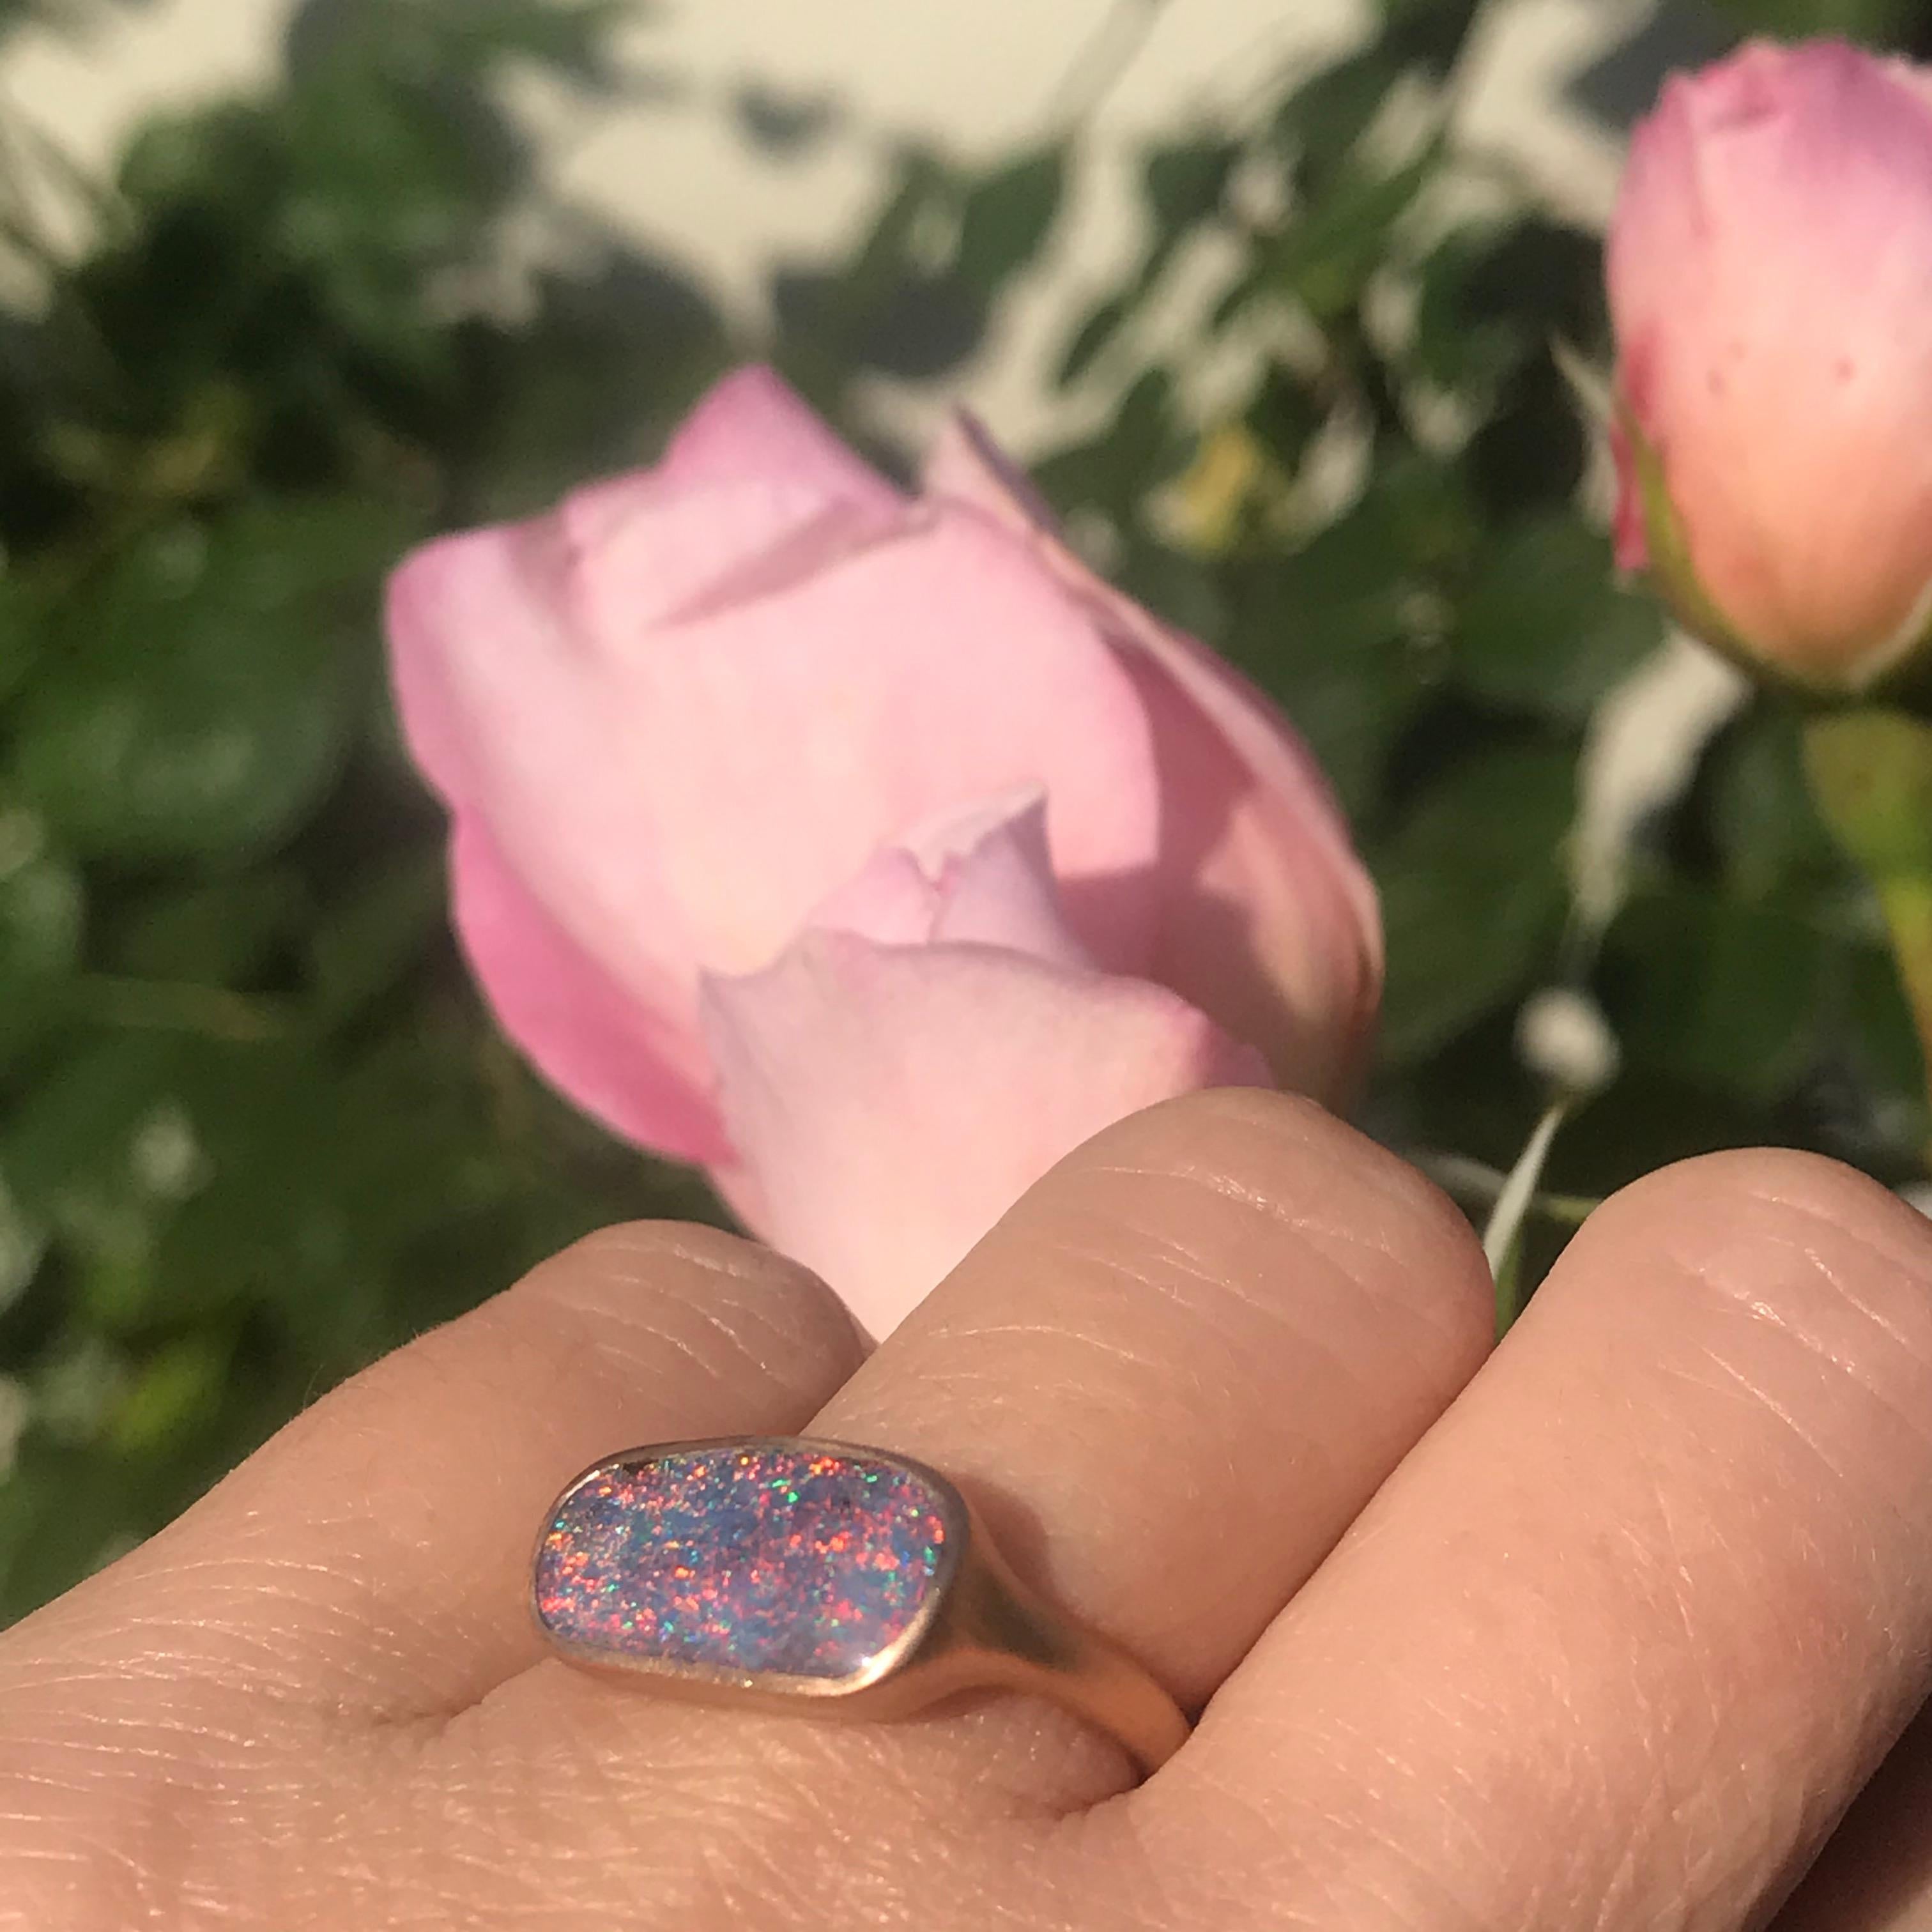 Dalben design 18k rose gold satin finishing ring with a  2,97 carat bezel-set rectangular green- pink Australian Boulder Opal .
The opal changes colors from pink and green with different light and  angulations .
Ring size 6 3/4 - EU 54 re-sizable to